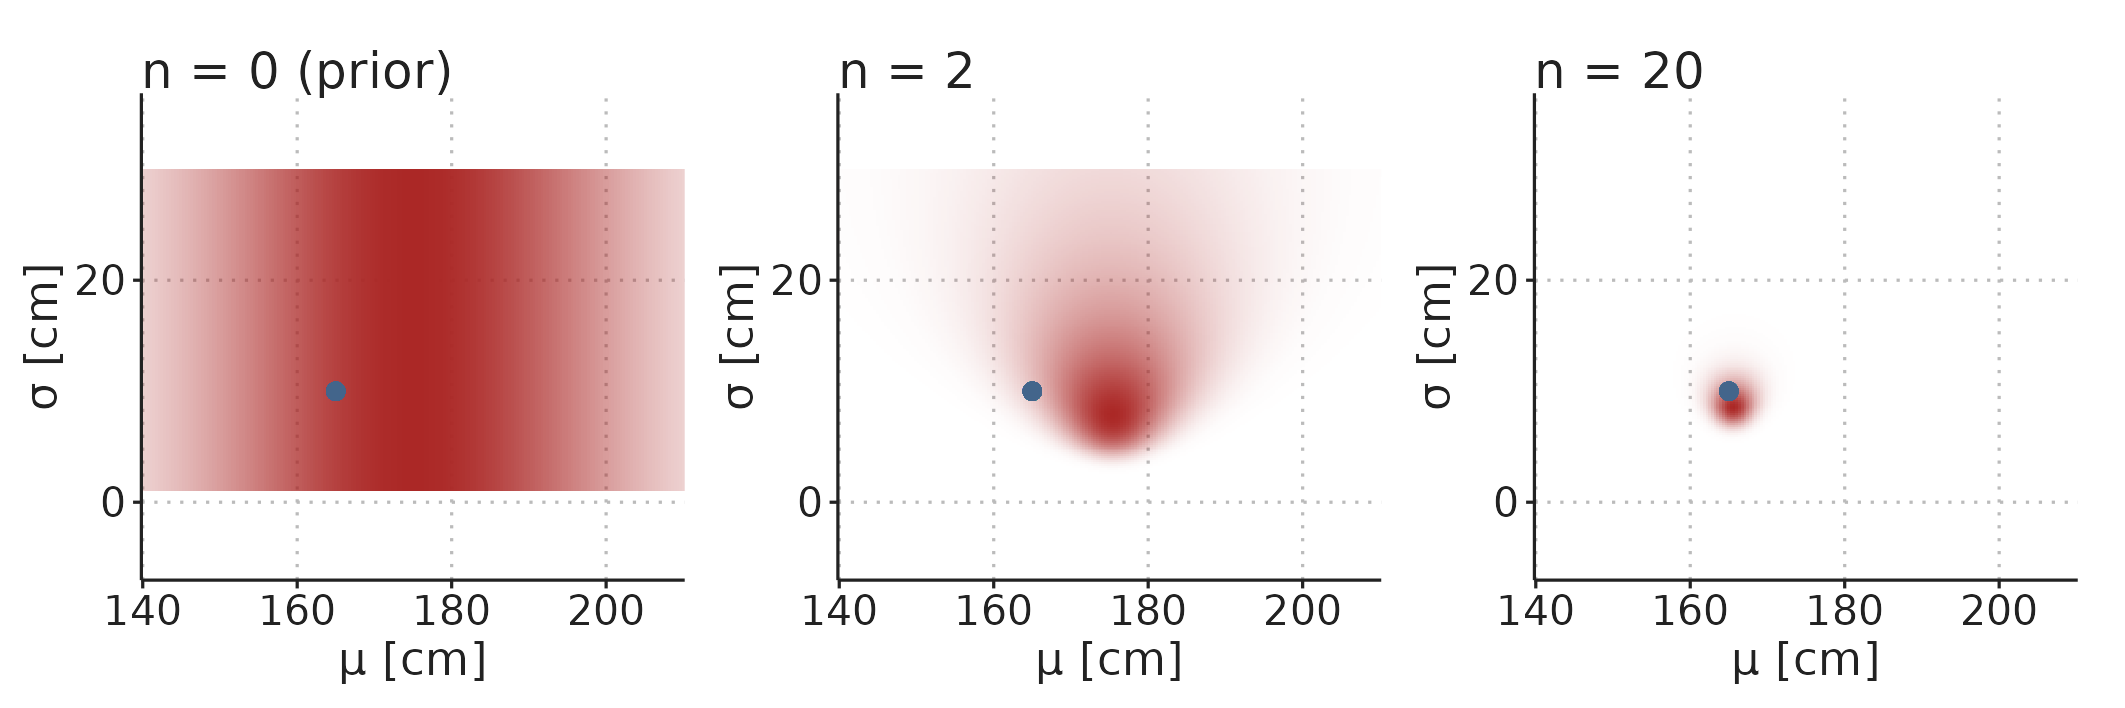 The prior and posterior distributions are multidimensional distributions with a dimension for each parameter in the model. Color density represent probability density.